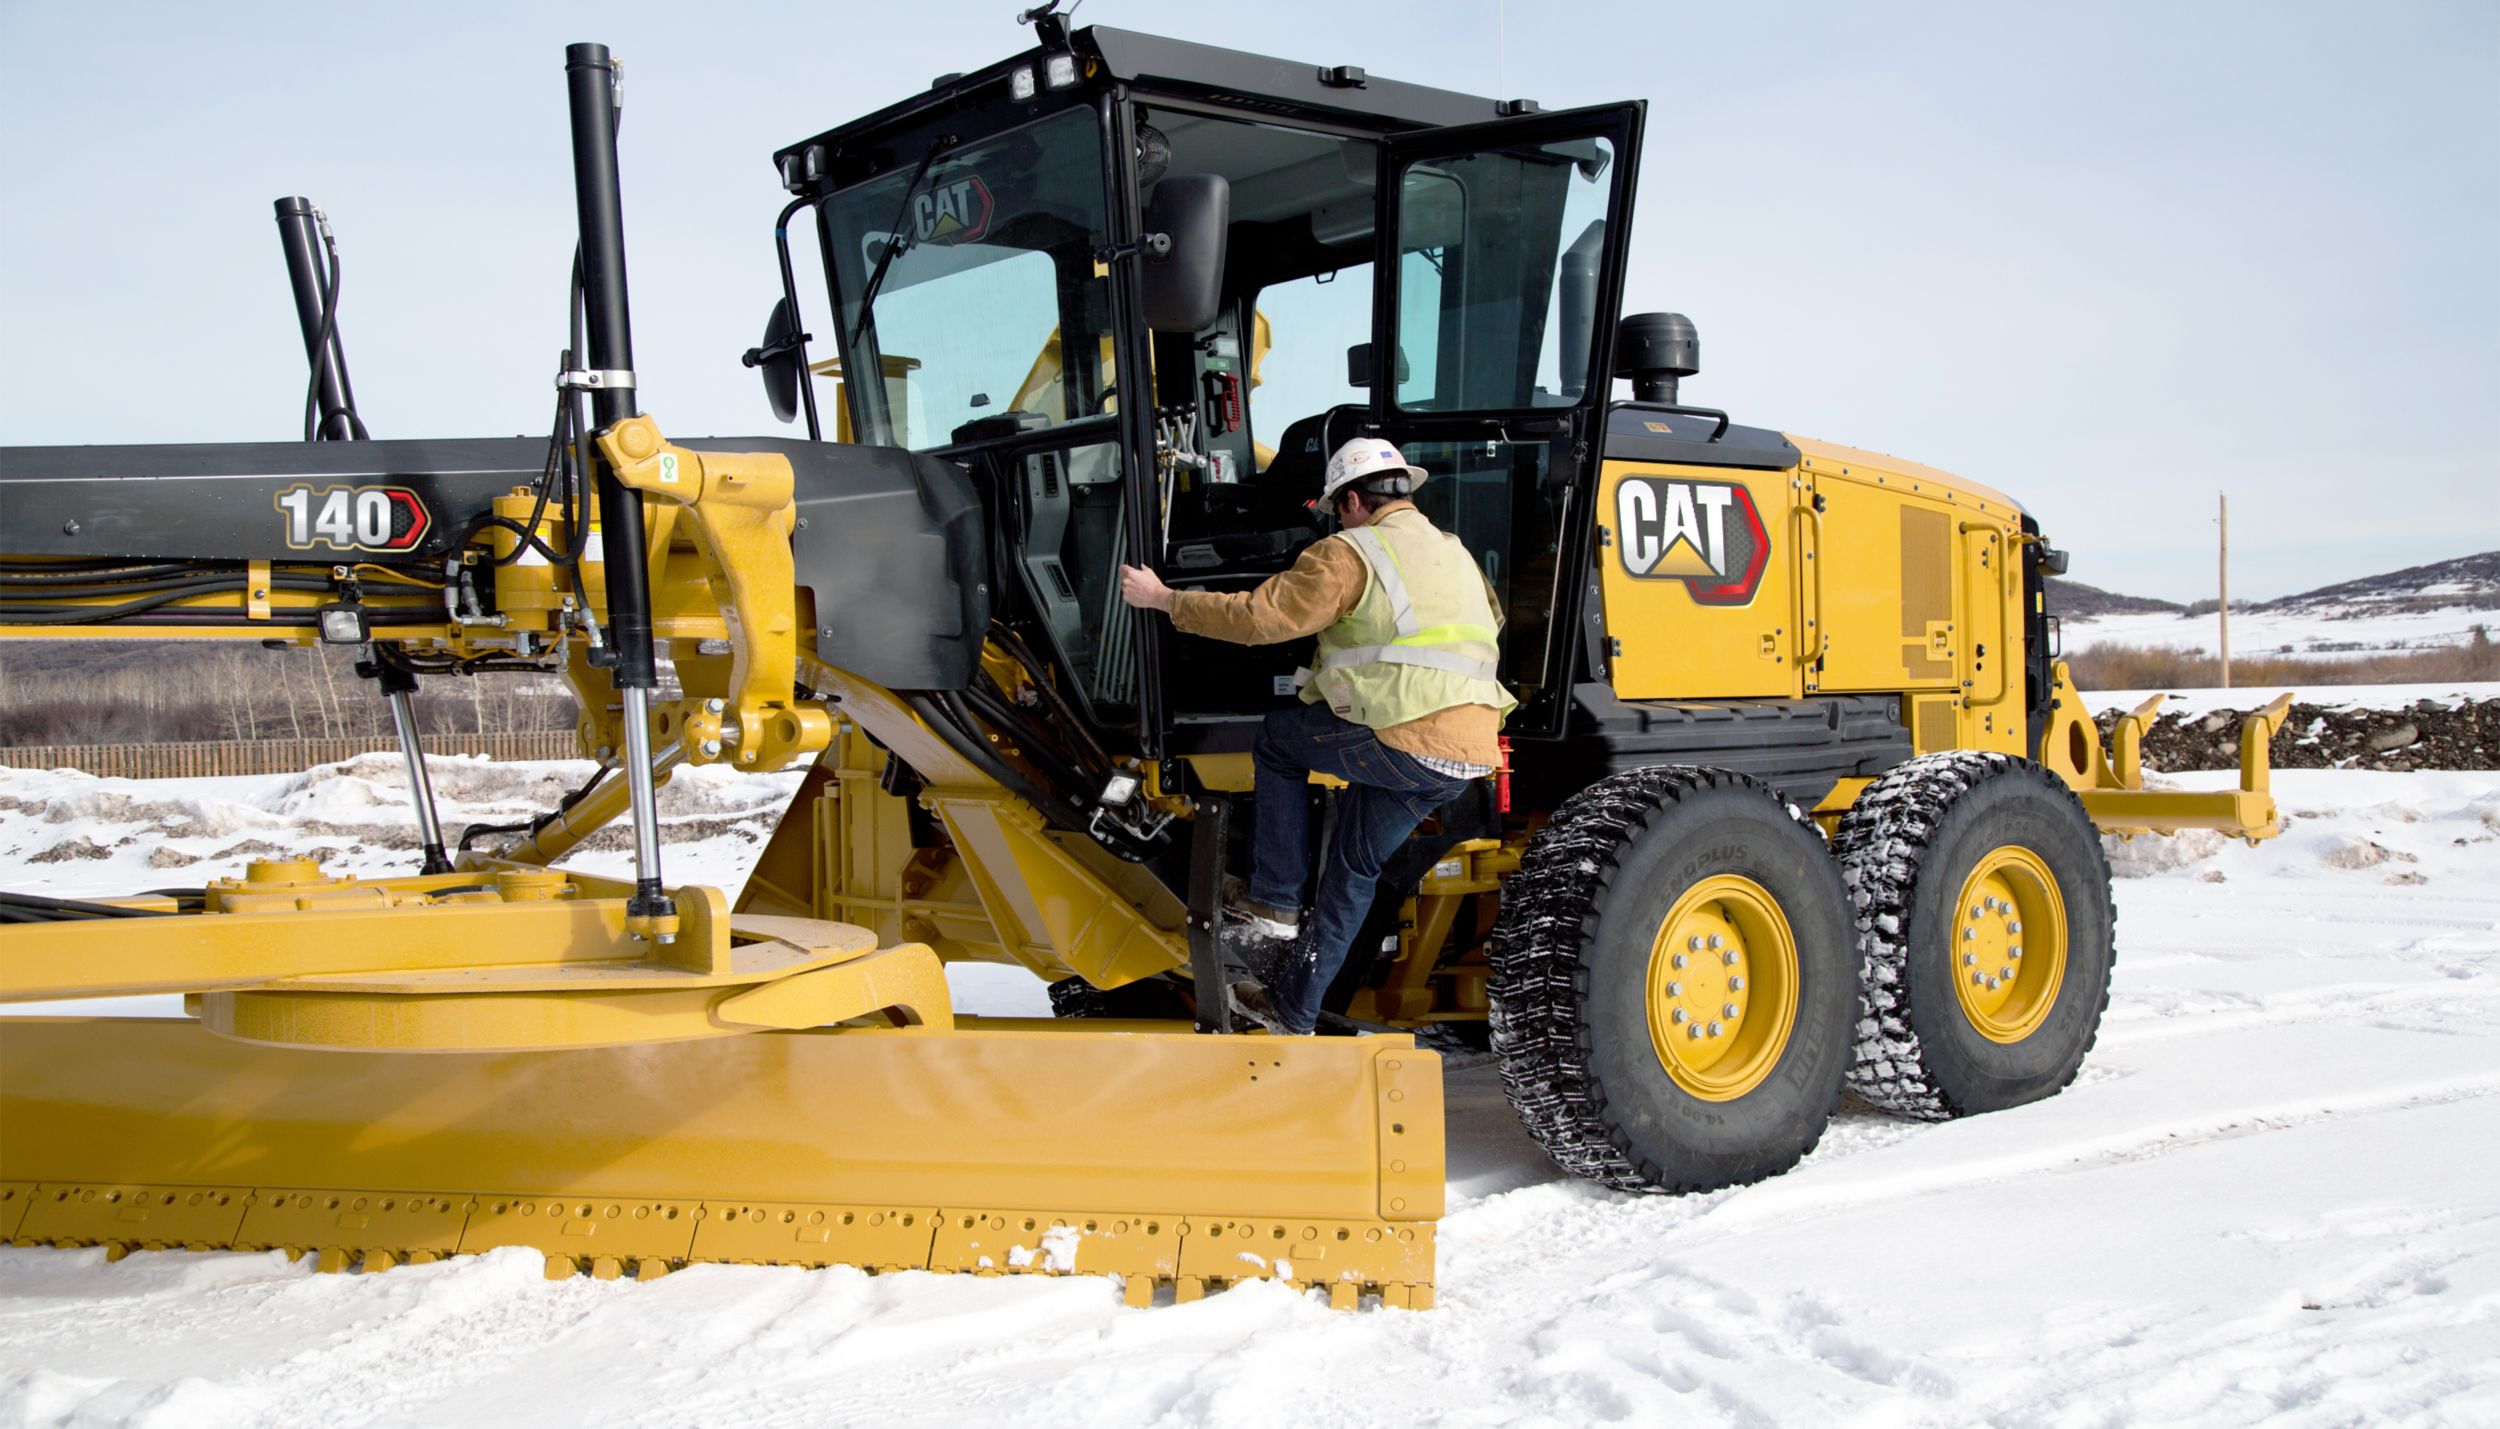 Cat 140 Motor Grader - SAFELY HOME EVERY DAY